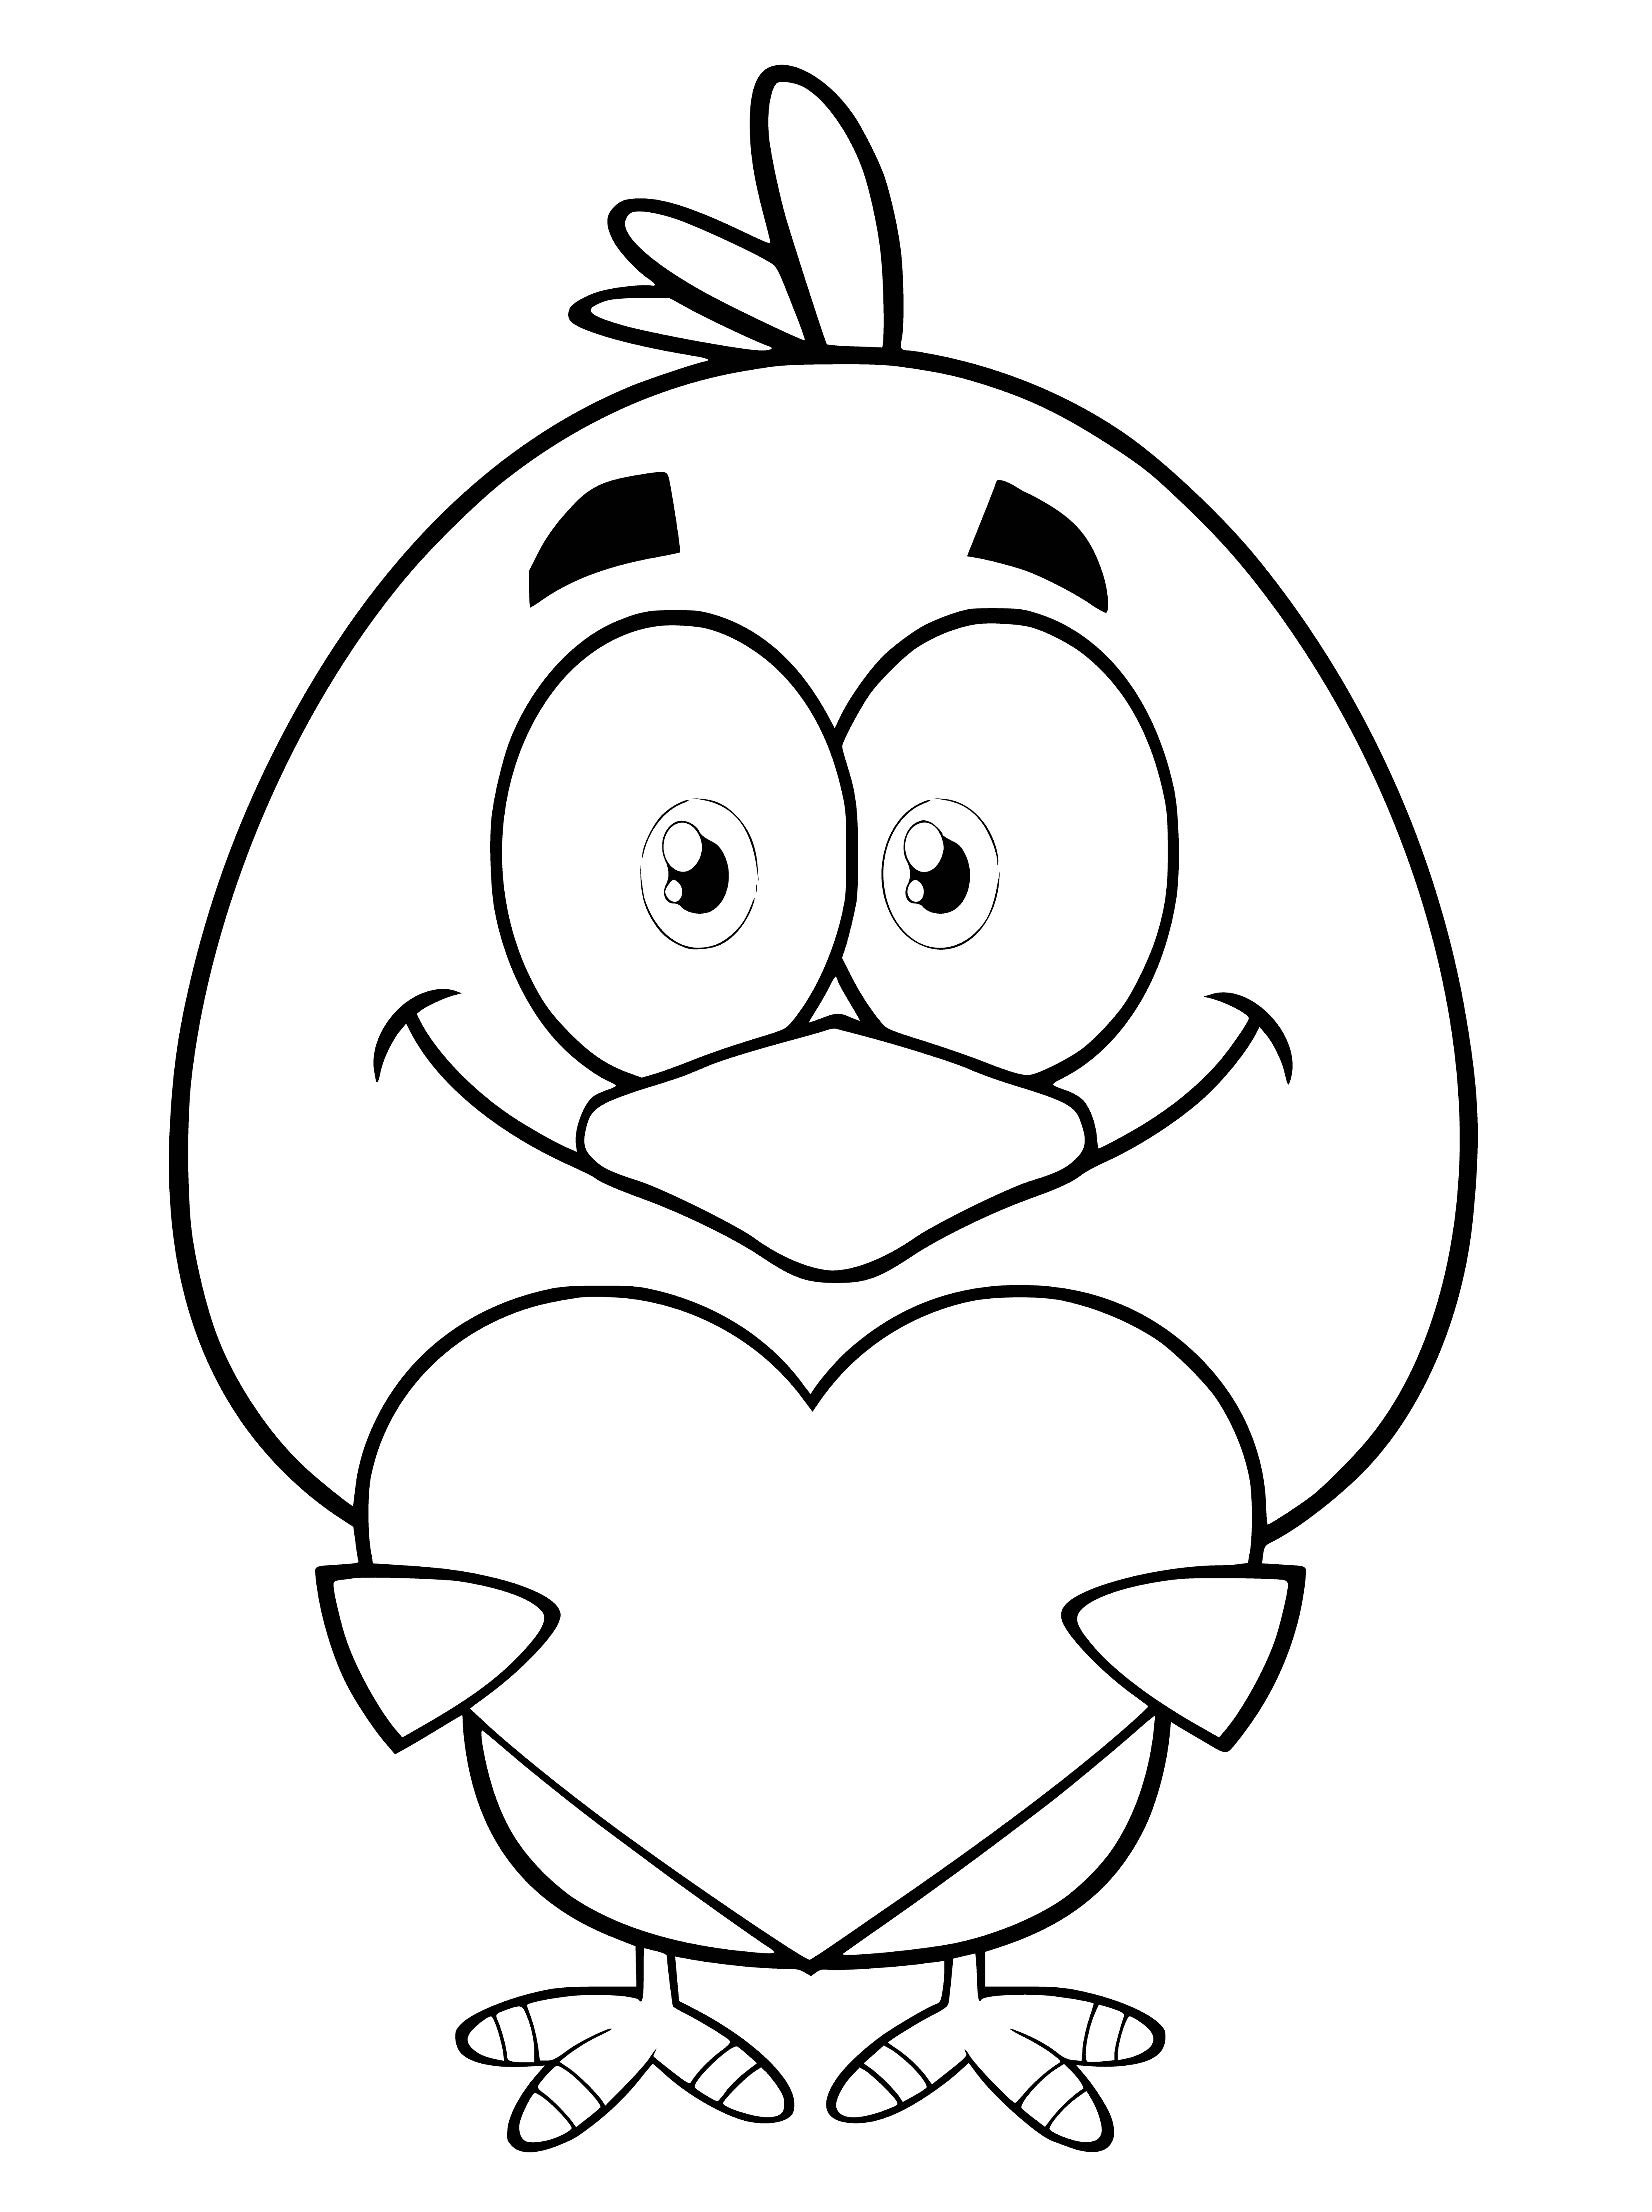 coloring page: Chicken is decorated for Valentine's Day with a red heart, cup & white plate. Above the chicken is a red heart with an "X" in the center. #craft